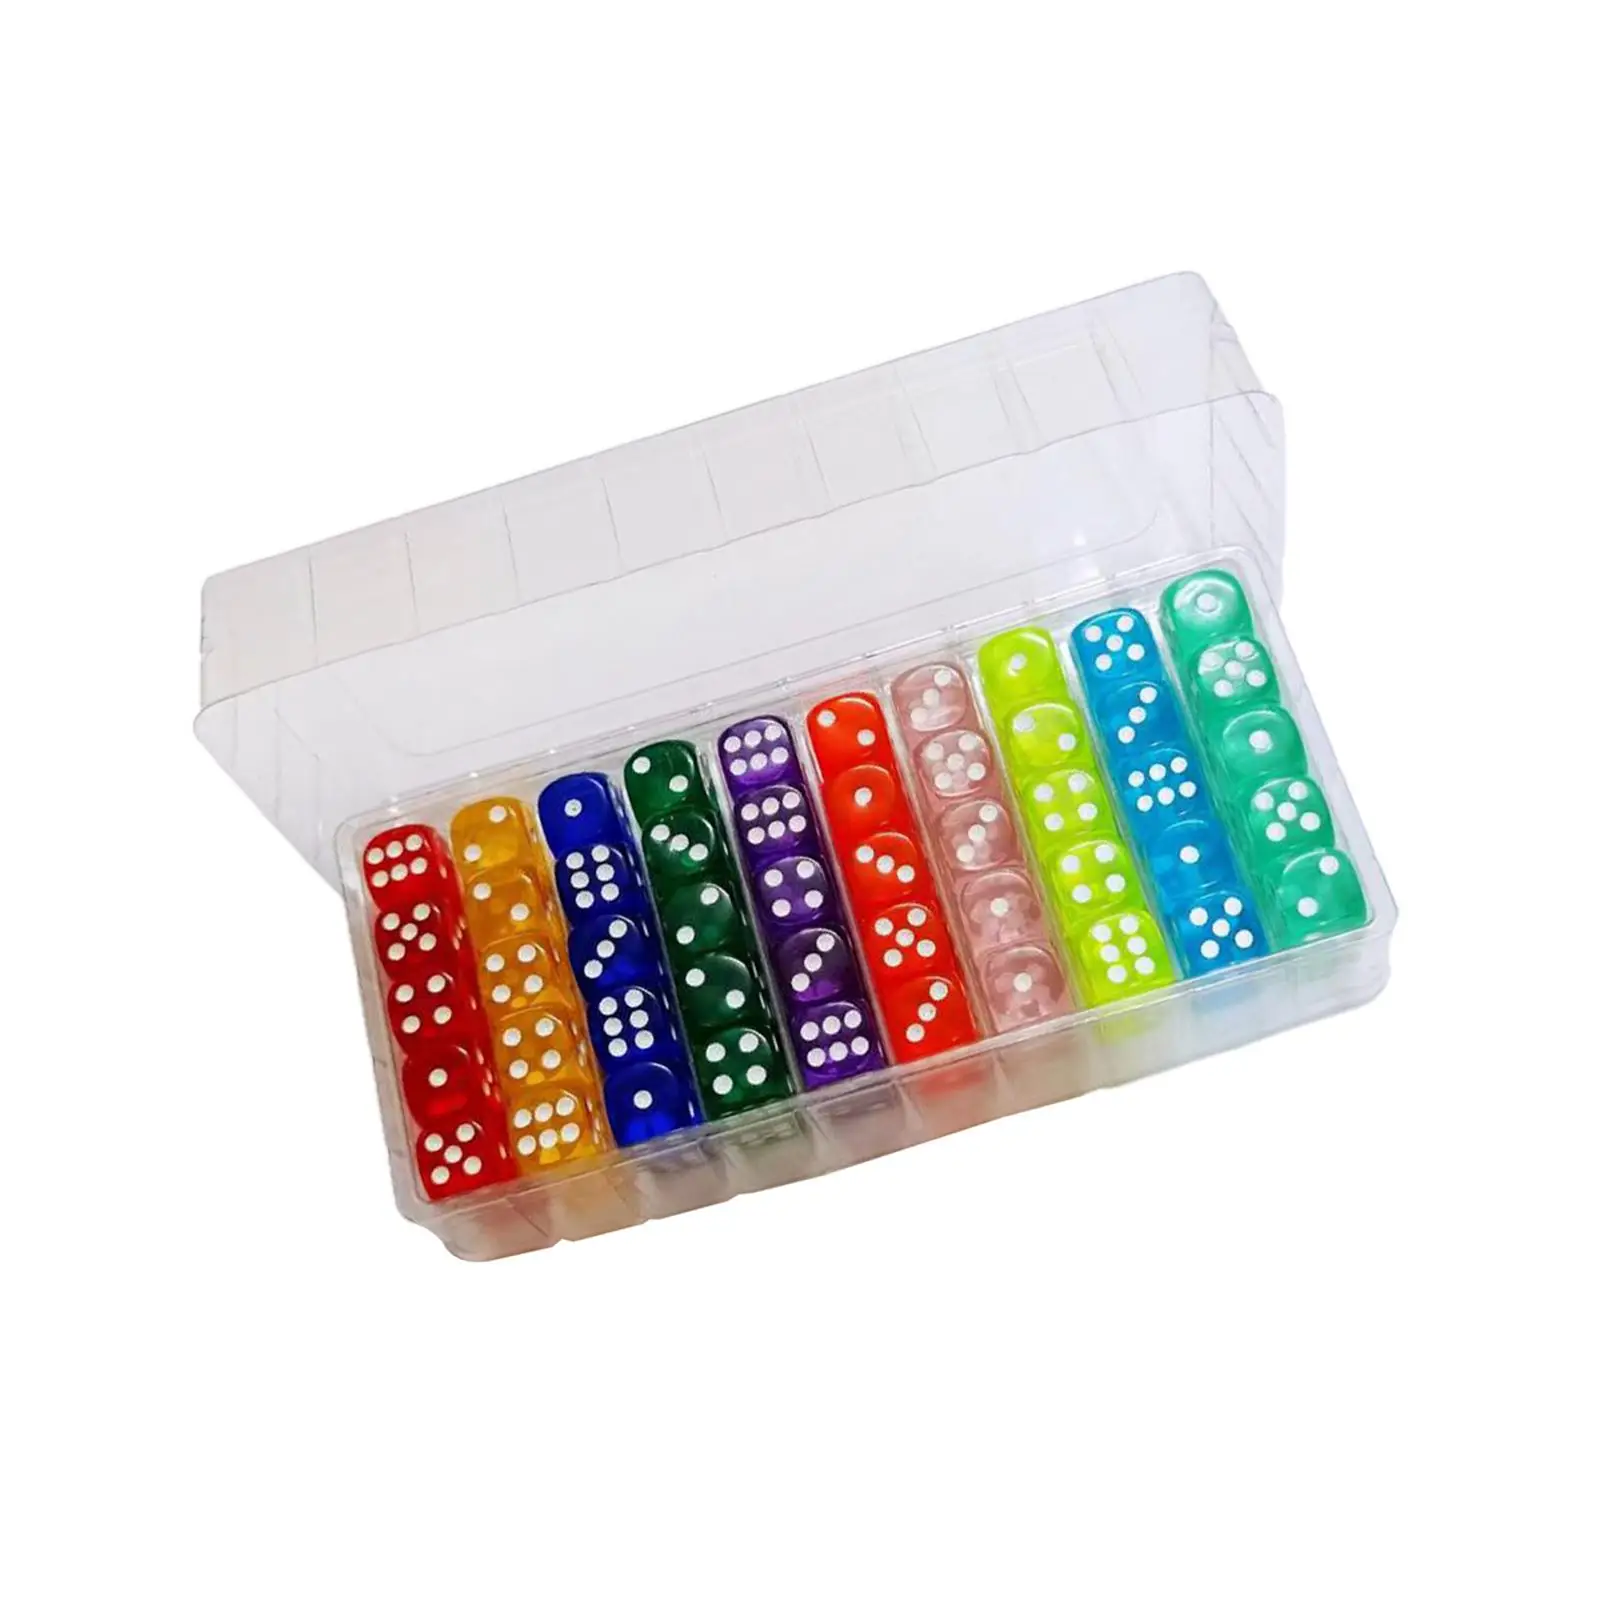 100Pcs 6 Sided Dice Set Translucent Colors Acrylic Dice Round Corner 14mm for